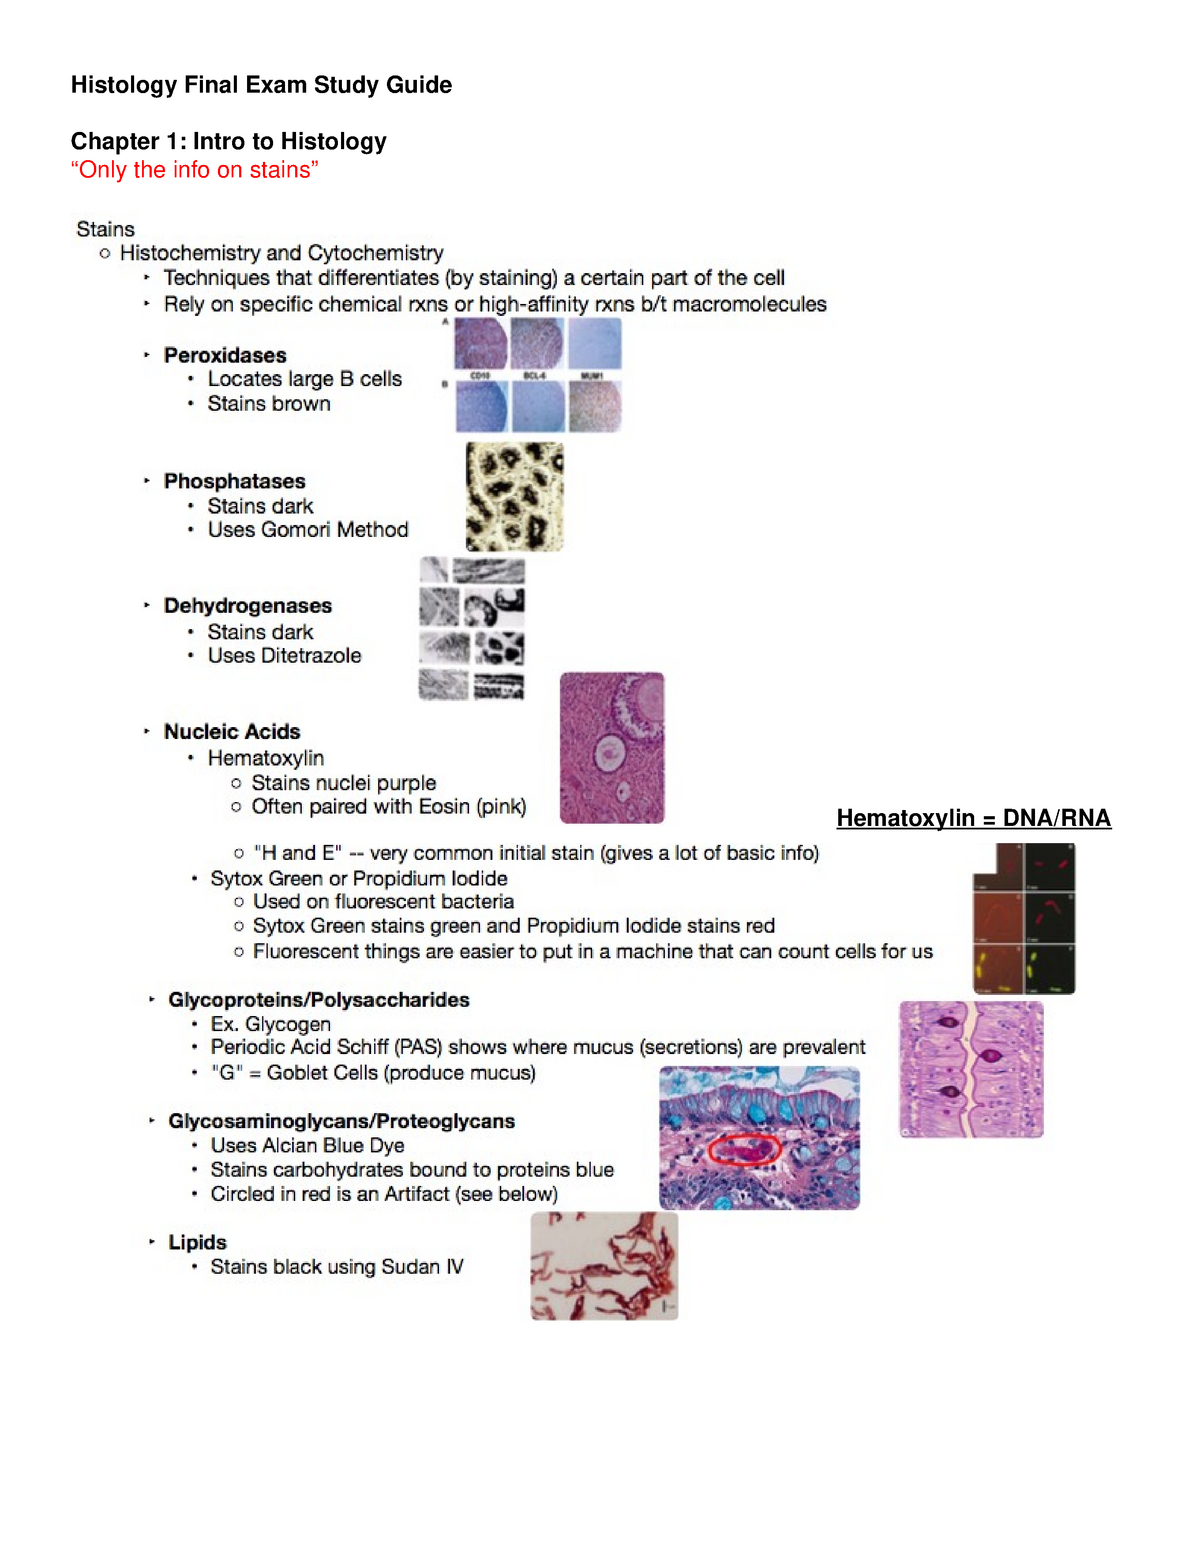 Histology Final Exam Study Guide Chapter 1 Intro To Histology StuDocu